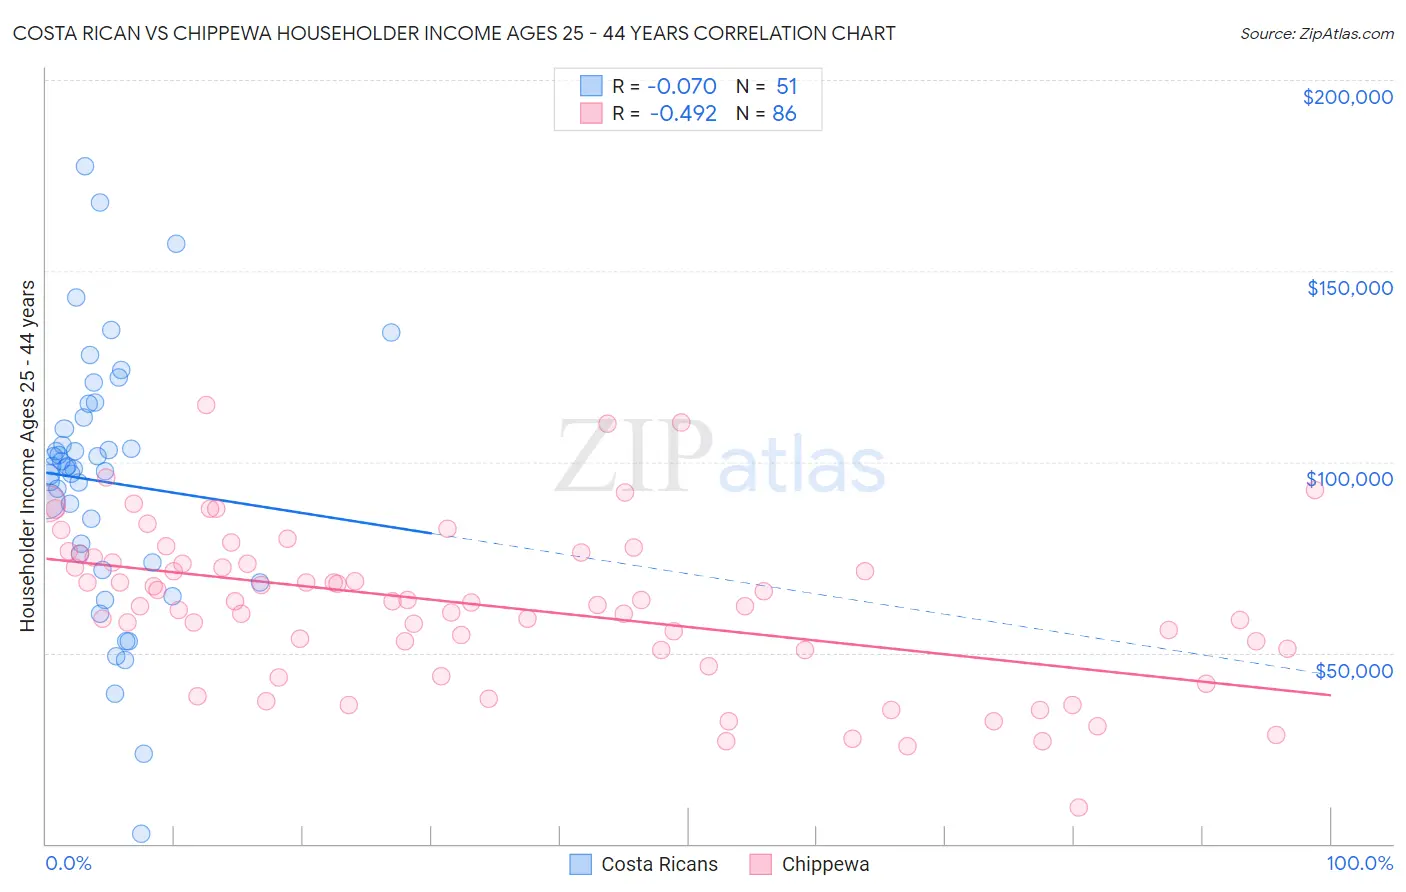 Costa Rican vs Chippewa Householder Income Ages 25 - 44 years